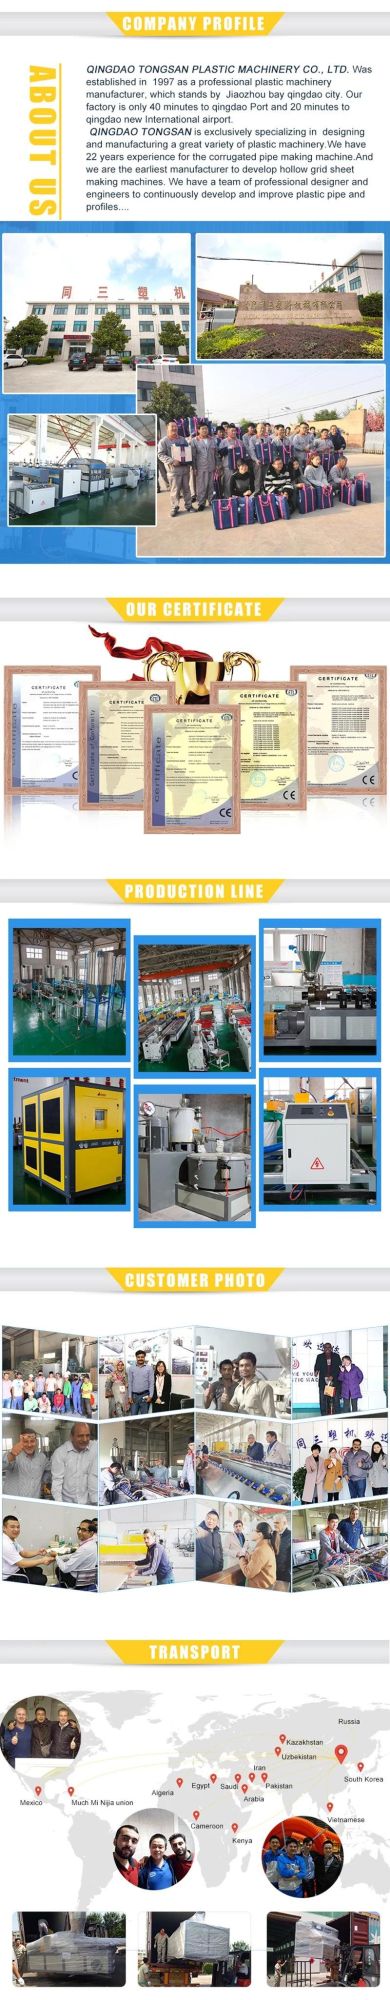 PE WPC Co-Extrusion Outdoor Decking Making Machine Production Line Manufacturer